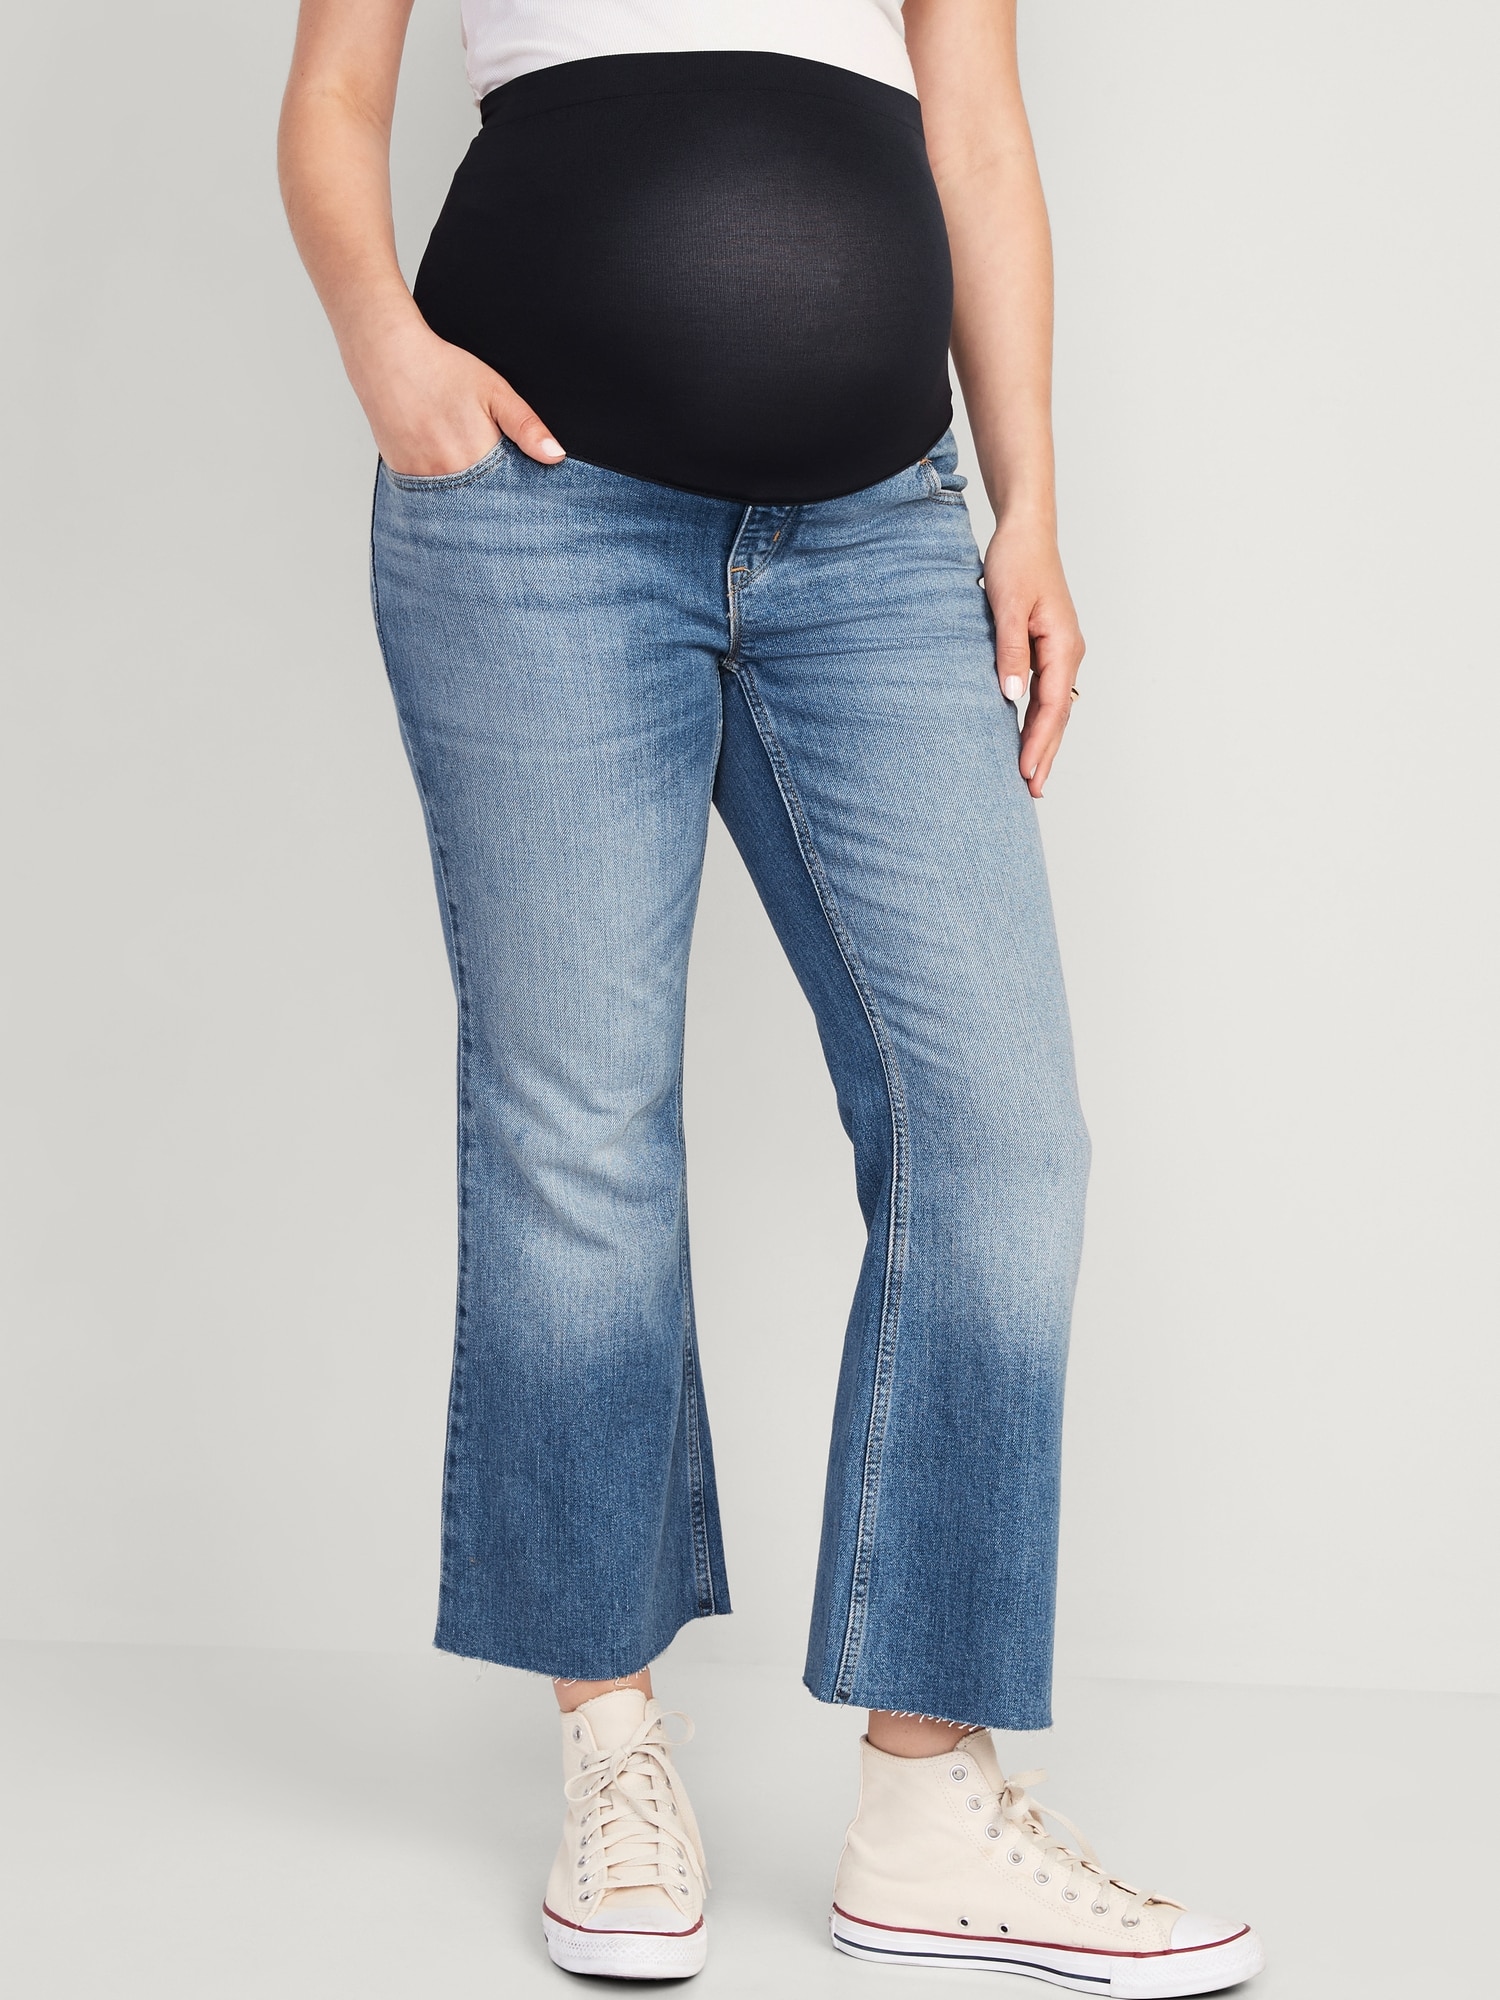 Old Navy Mid-Rise Cropped Flare Pants for Girls